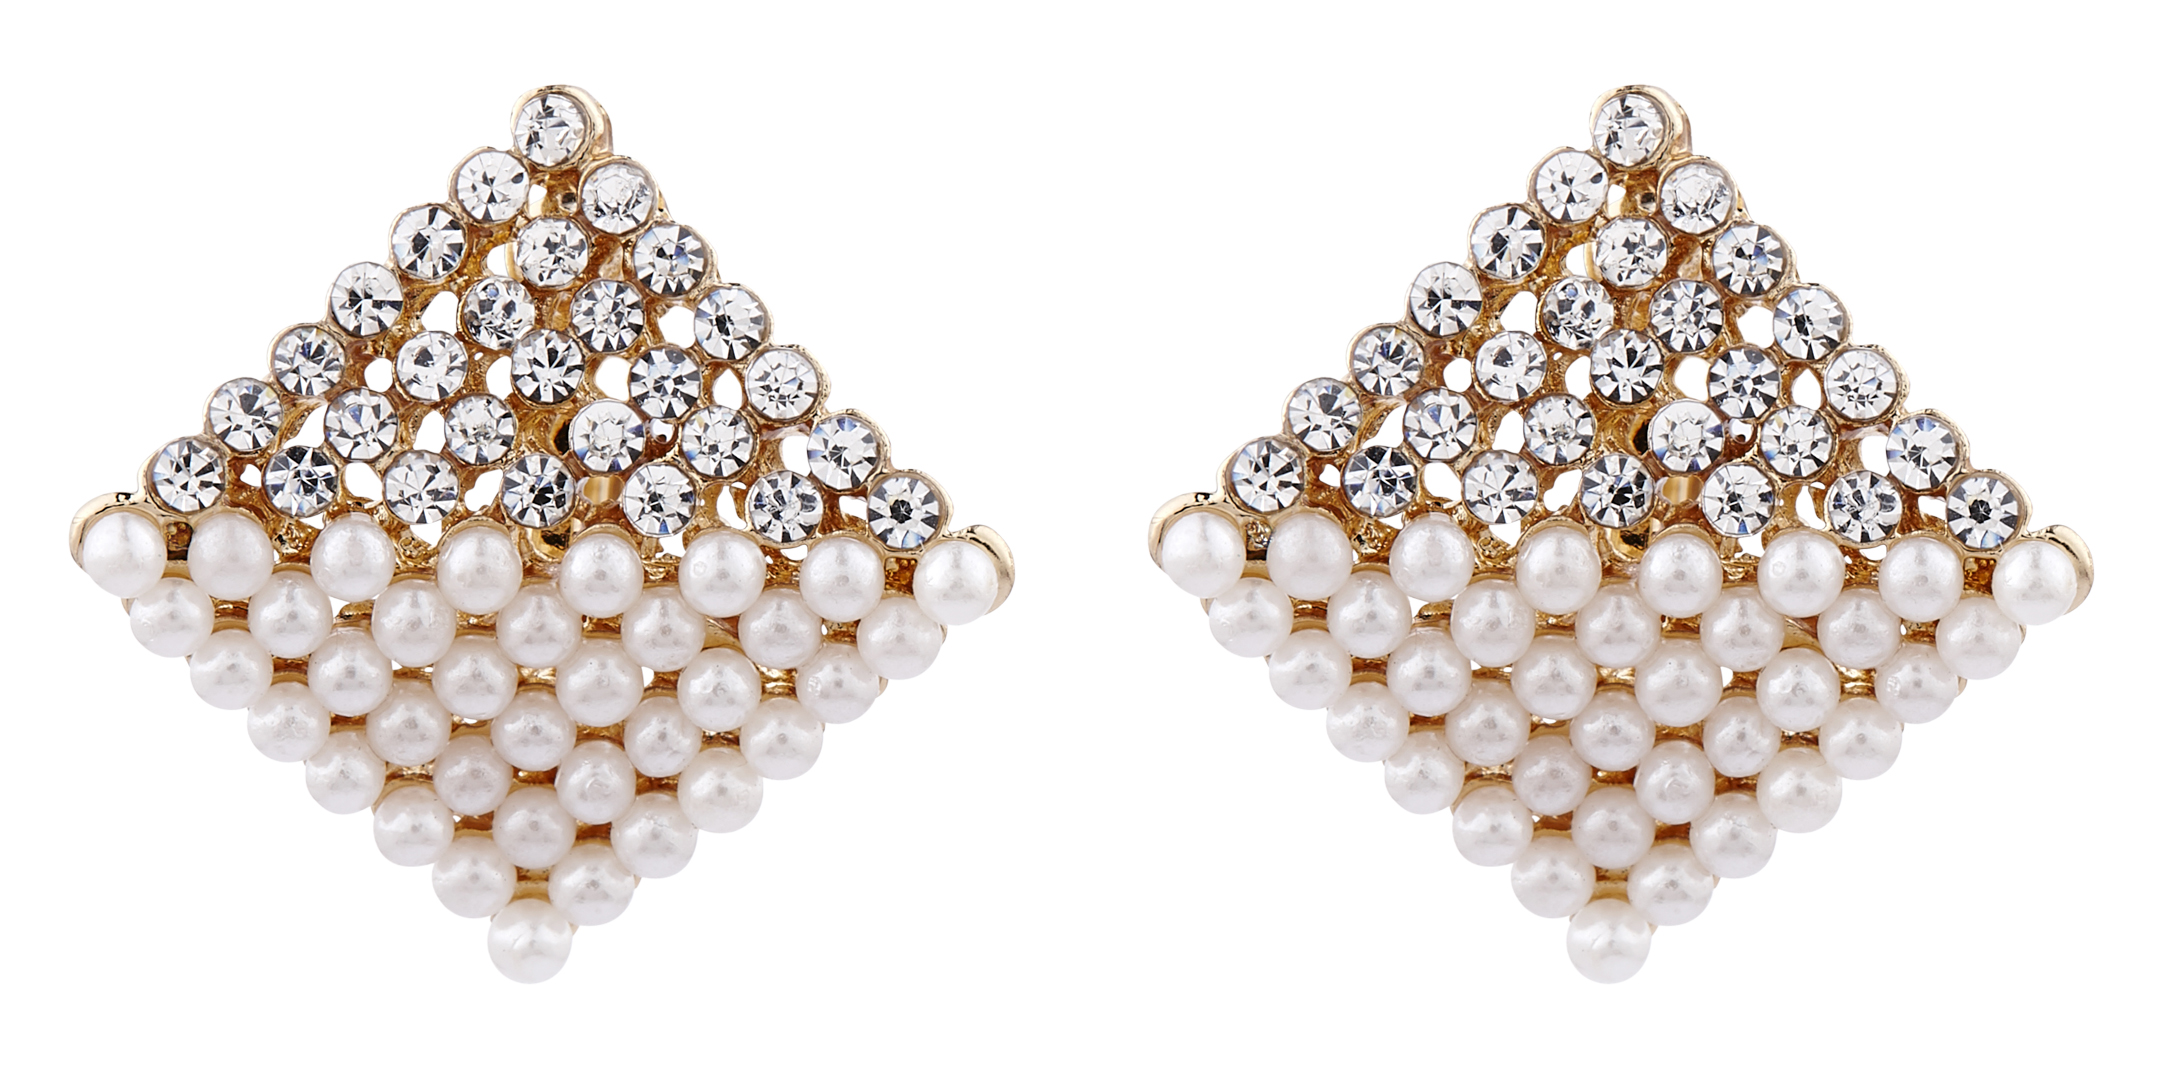 Clip On Earrings - Betsy RG - rose gold stud earring with CZ crystals and pearls